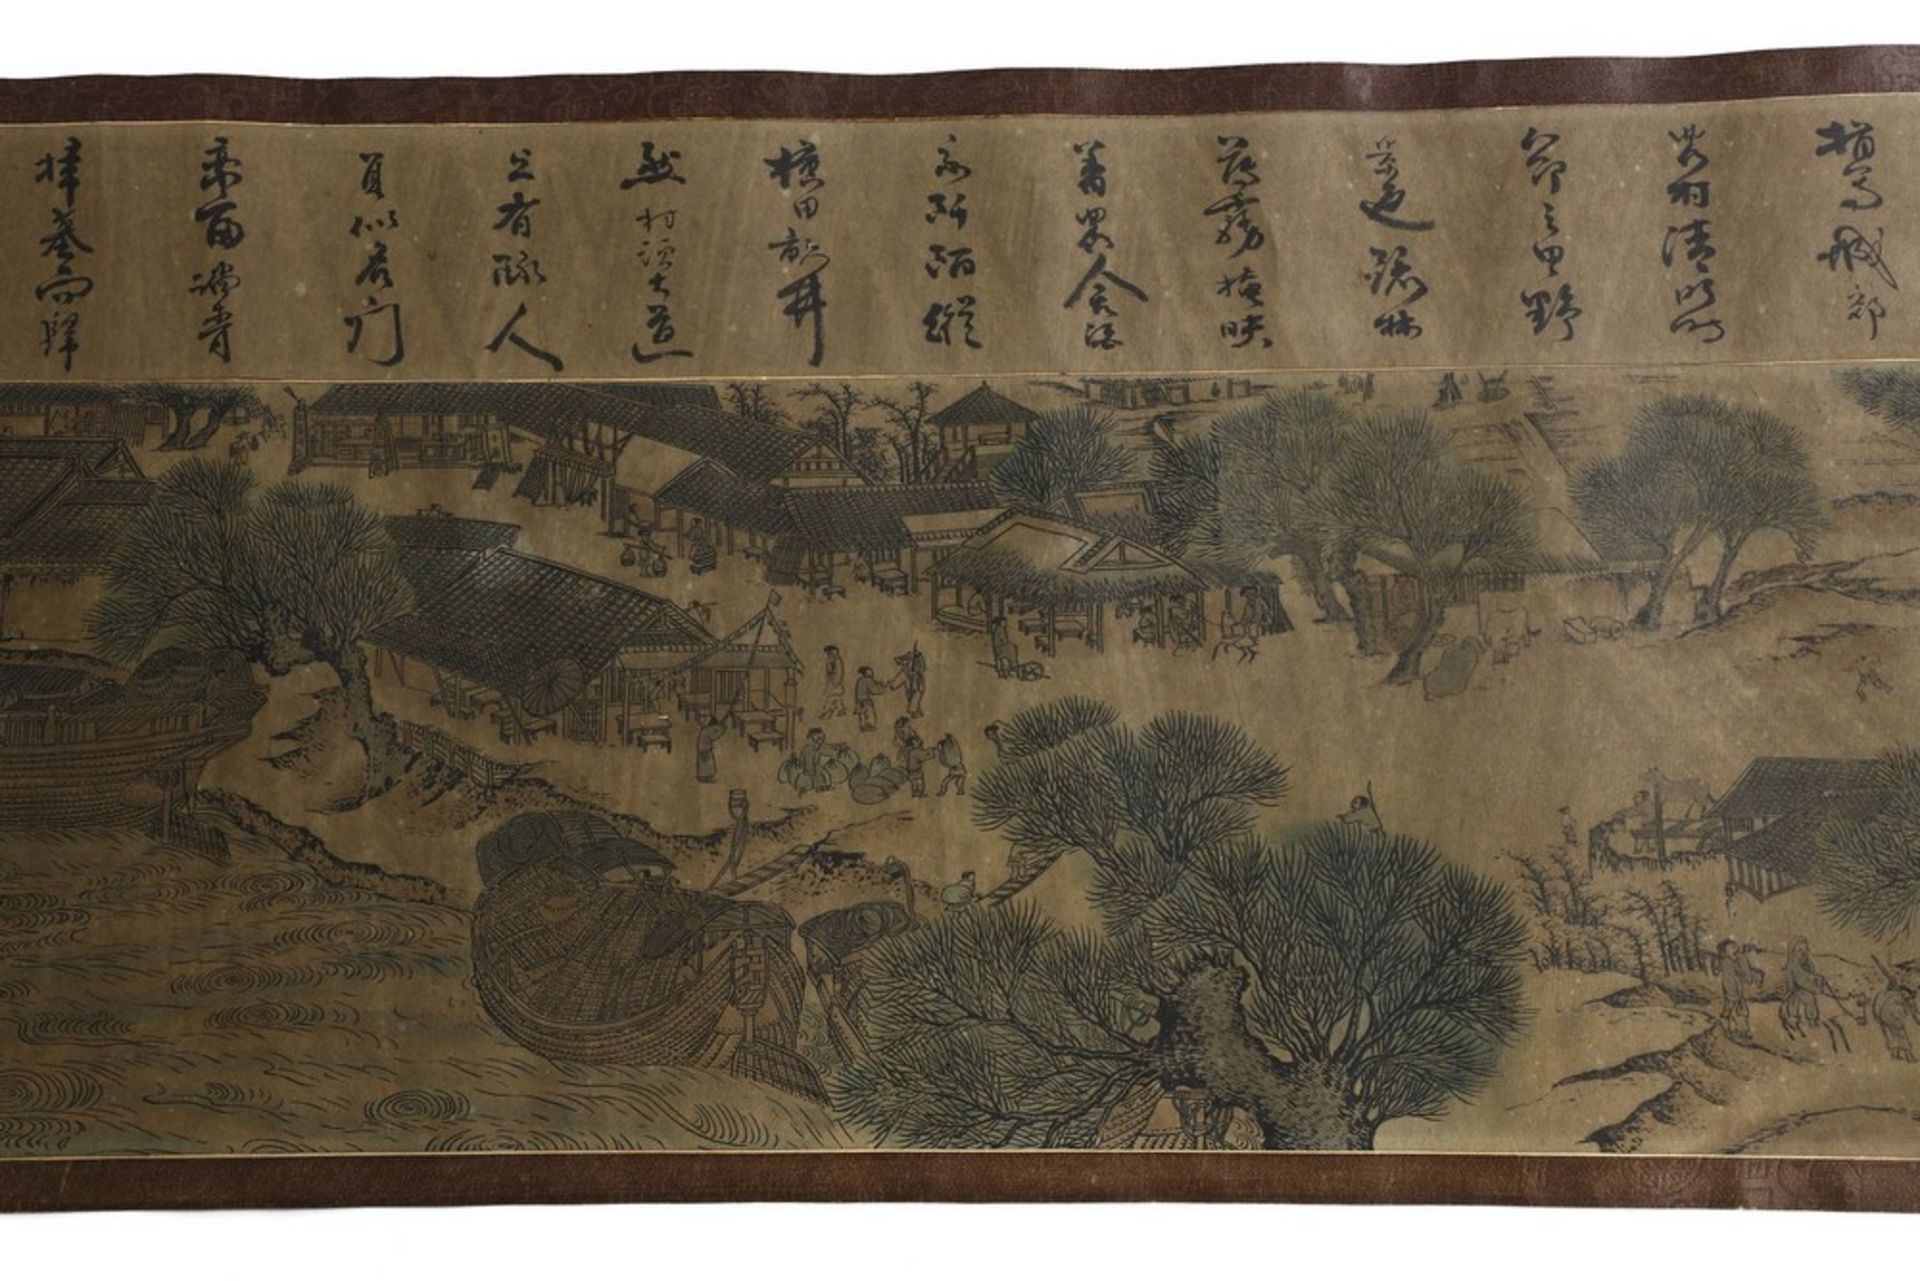 Arte Cinese A very long scroll on paper with a copy of Zhang Zeduan famous painting China, 20th cen - Image 10 of 11